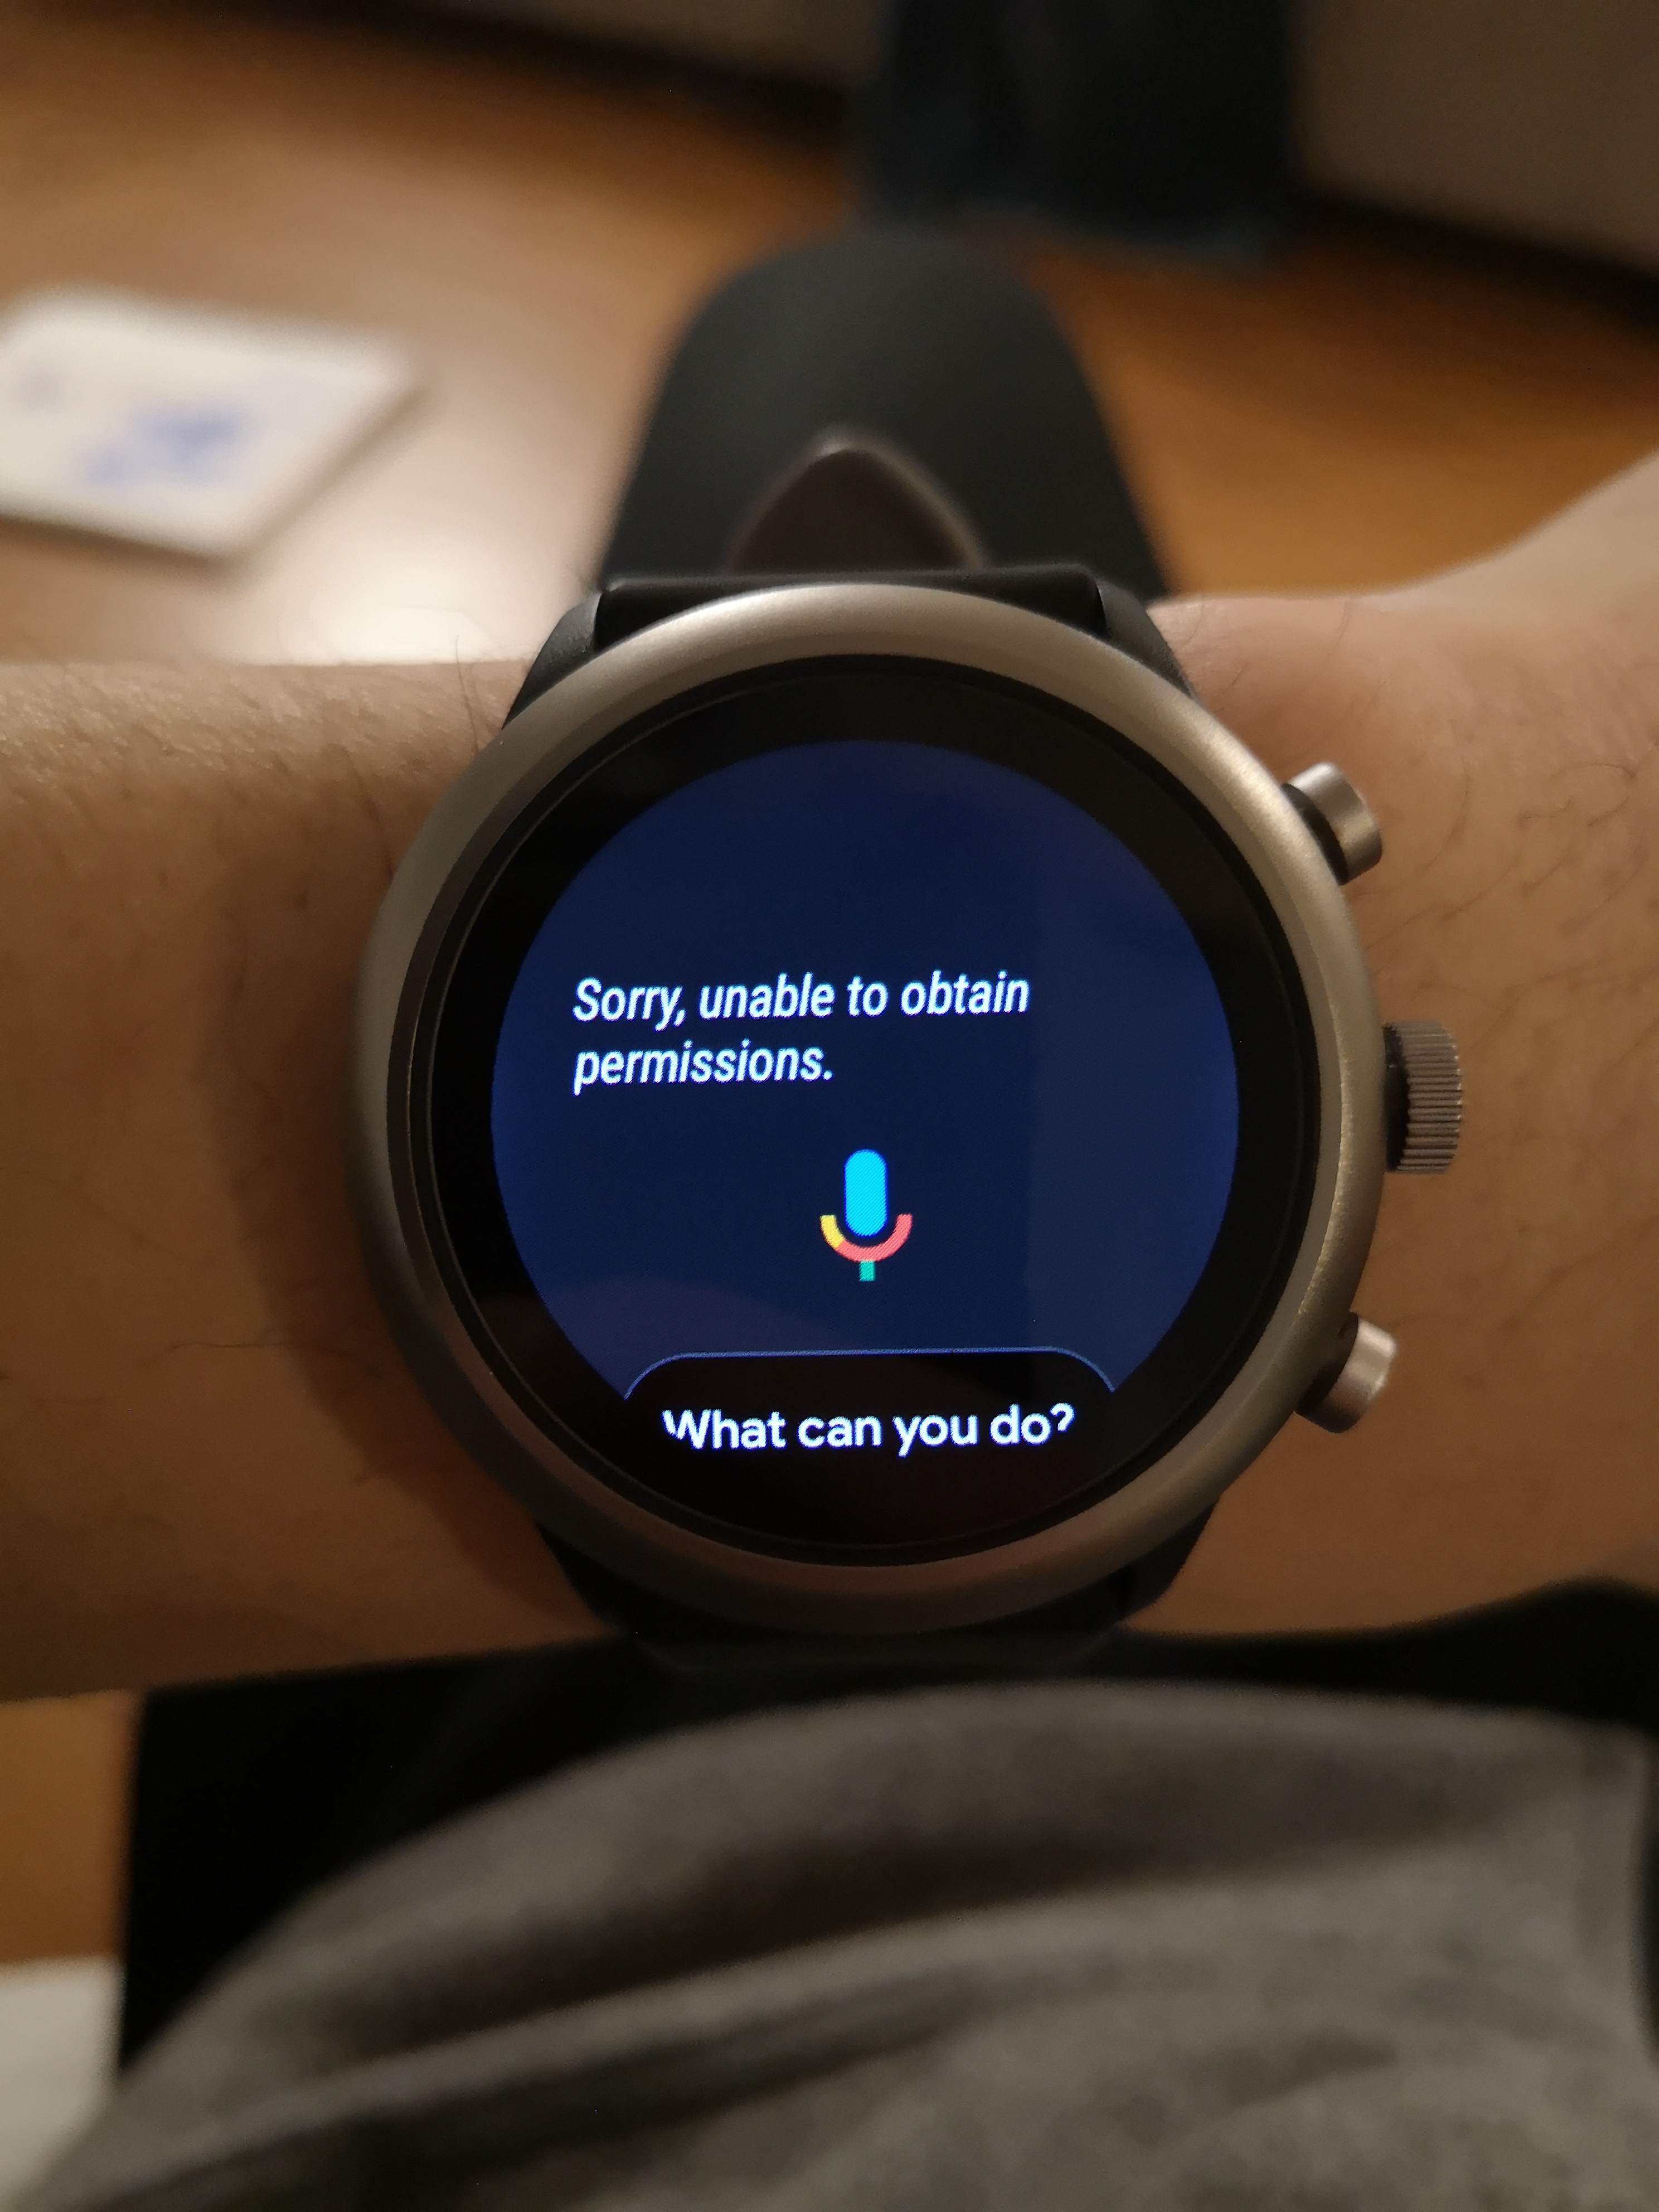 Garmin Vivoactive 3 Google Assistant on Sale, UP TO 70% OFF |  www.apmusicales.com